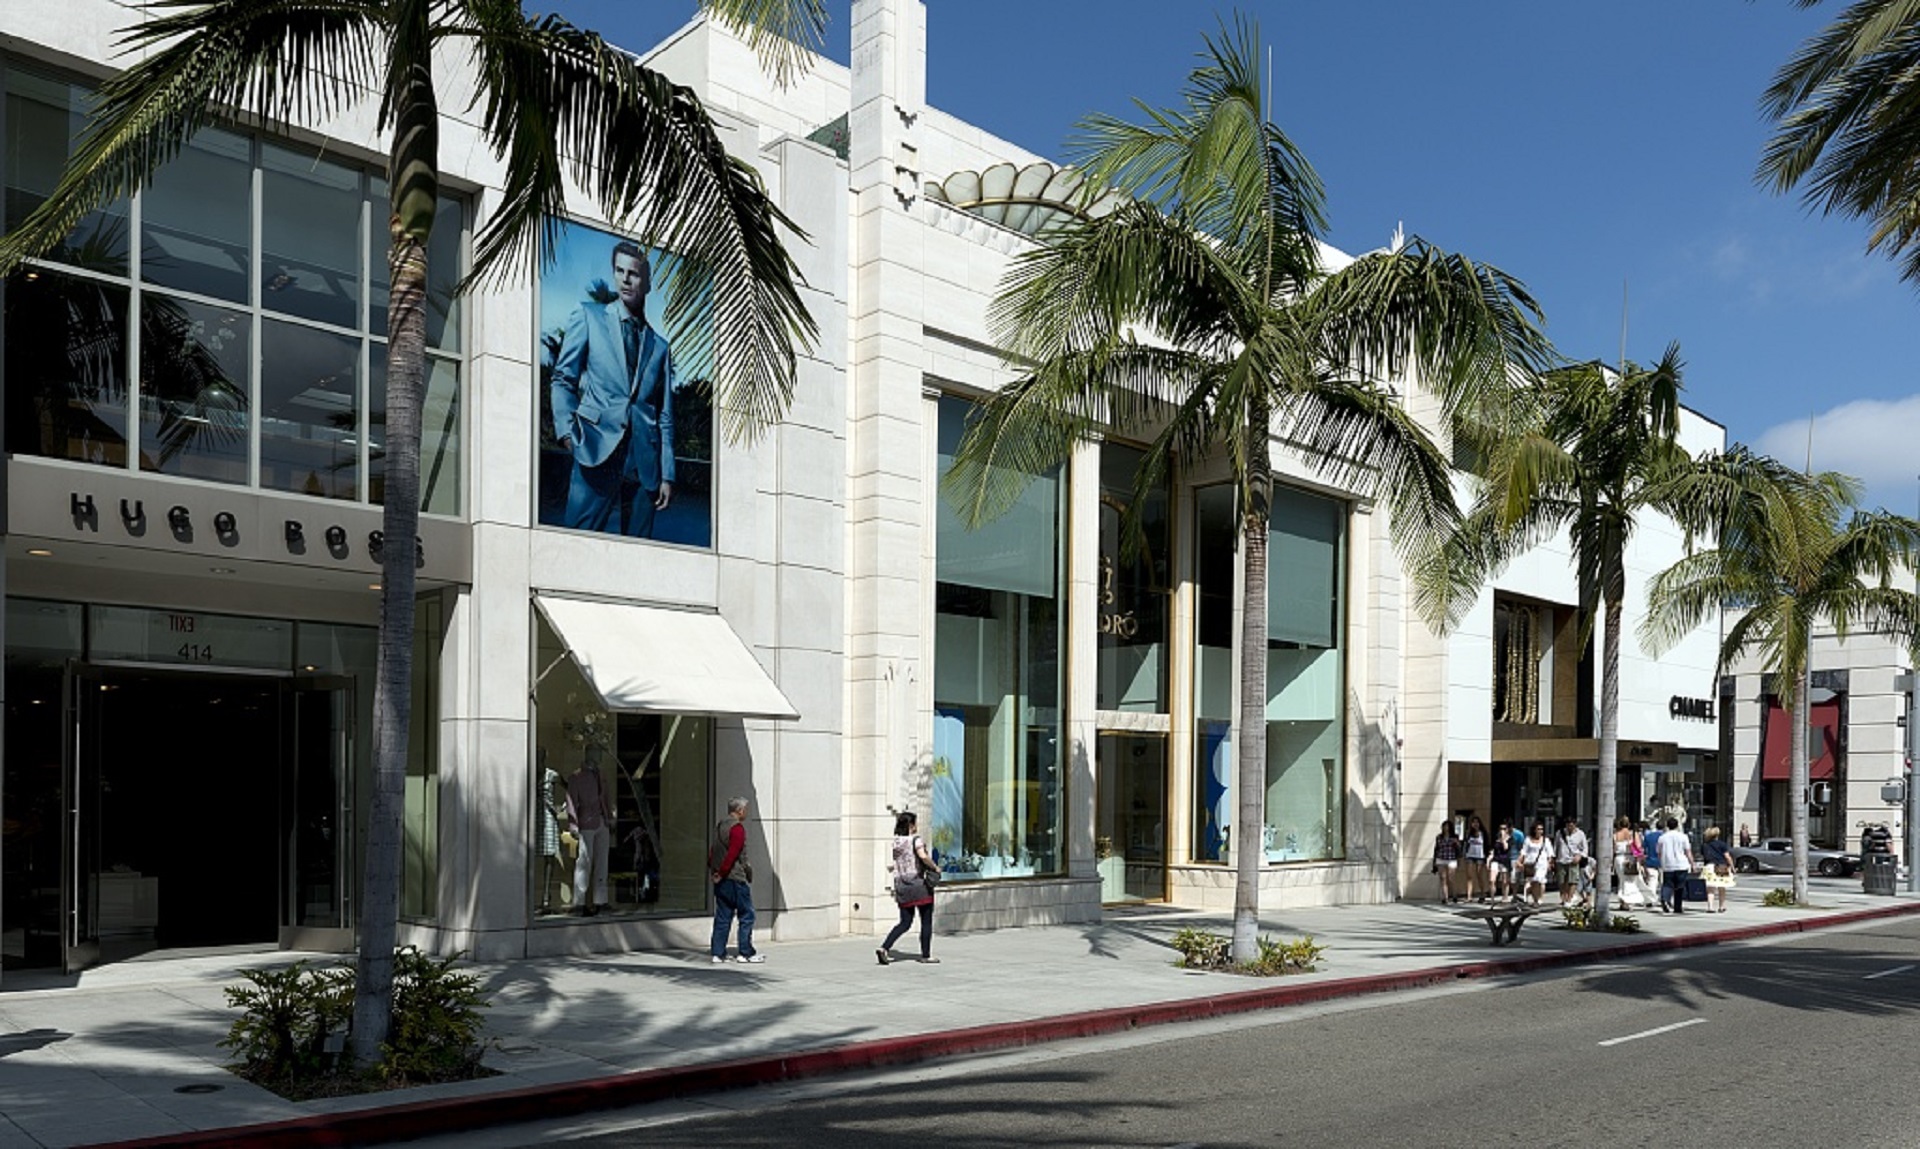 Rodeo drive photo